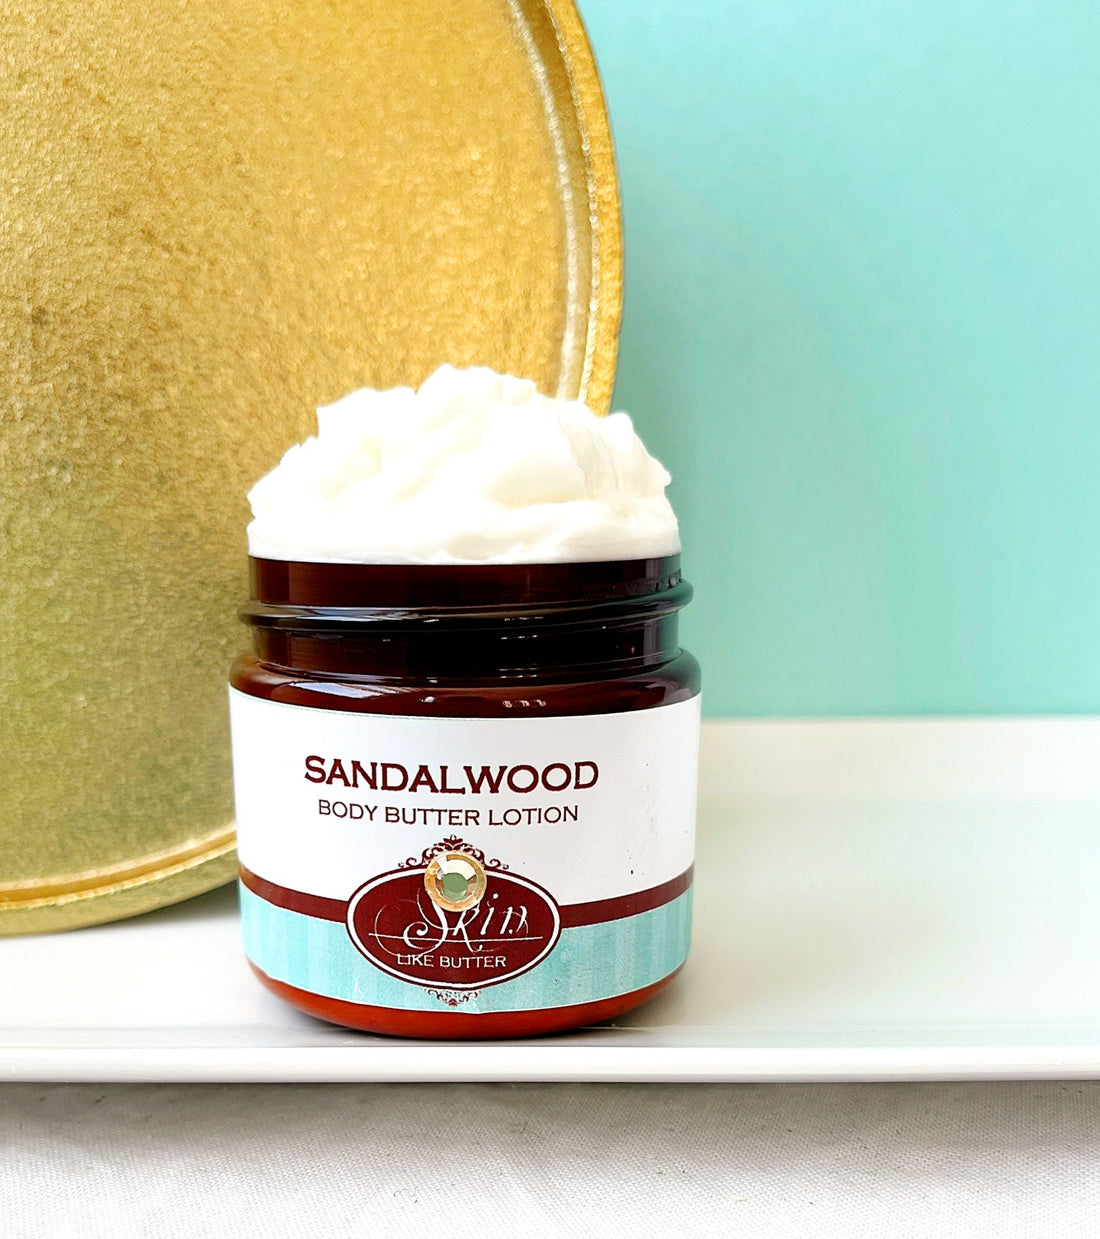 SANDALWOOD scented water free, vegan non-greasy Skin Like Butter Body Butter